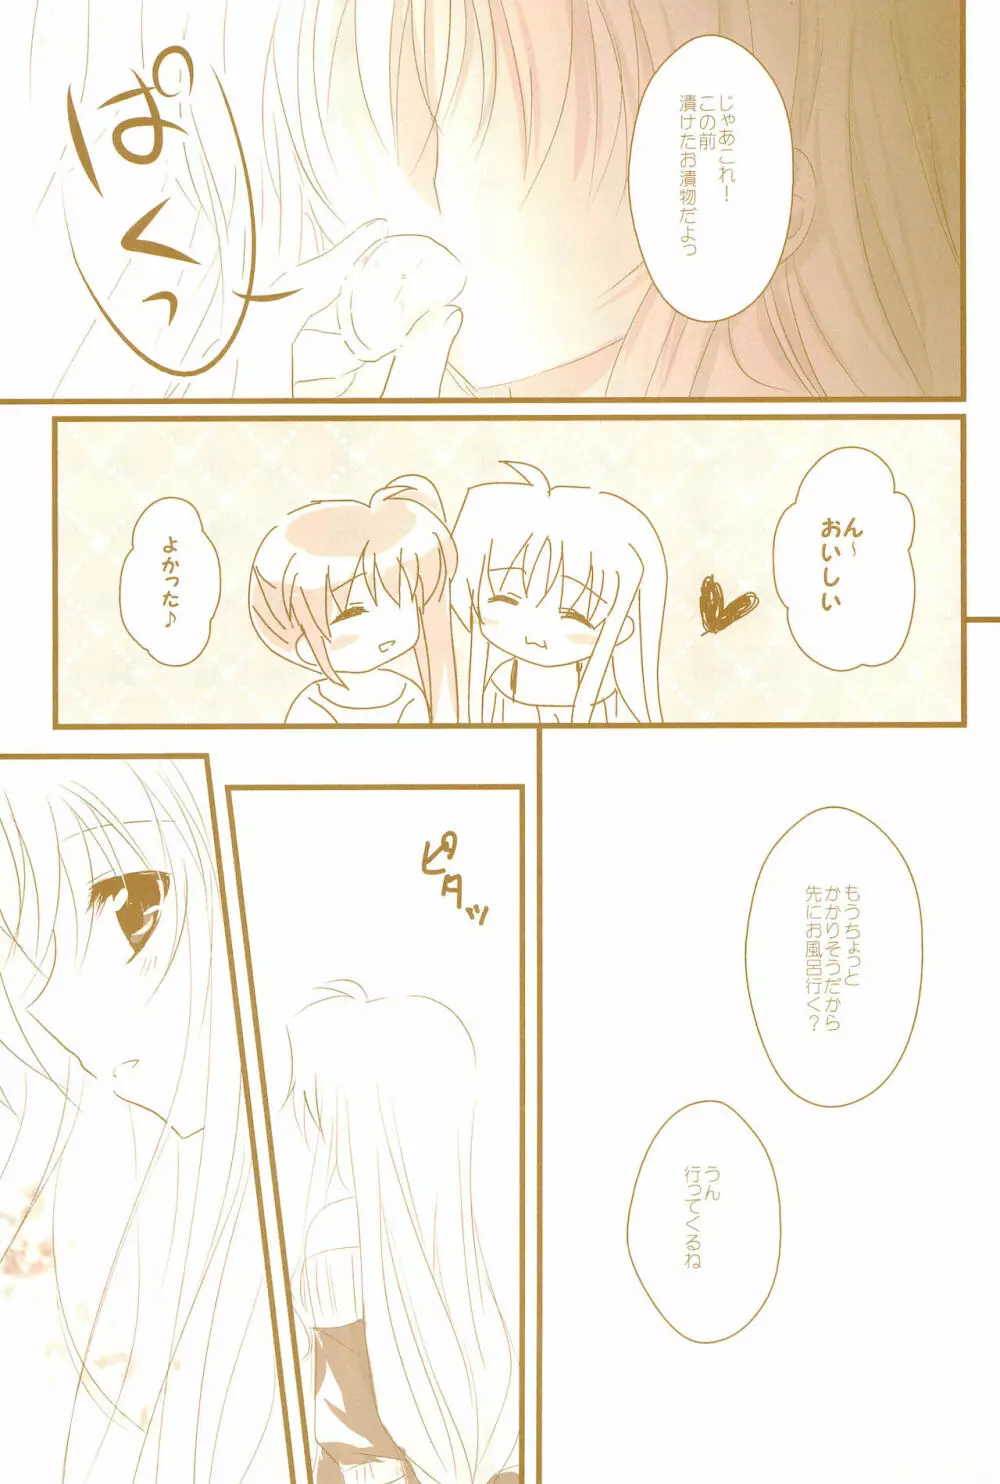 Love Life ～なのフェイなの再録集 3～ - page13